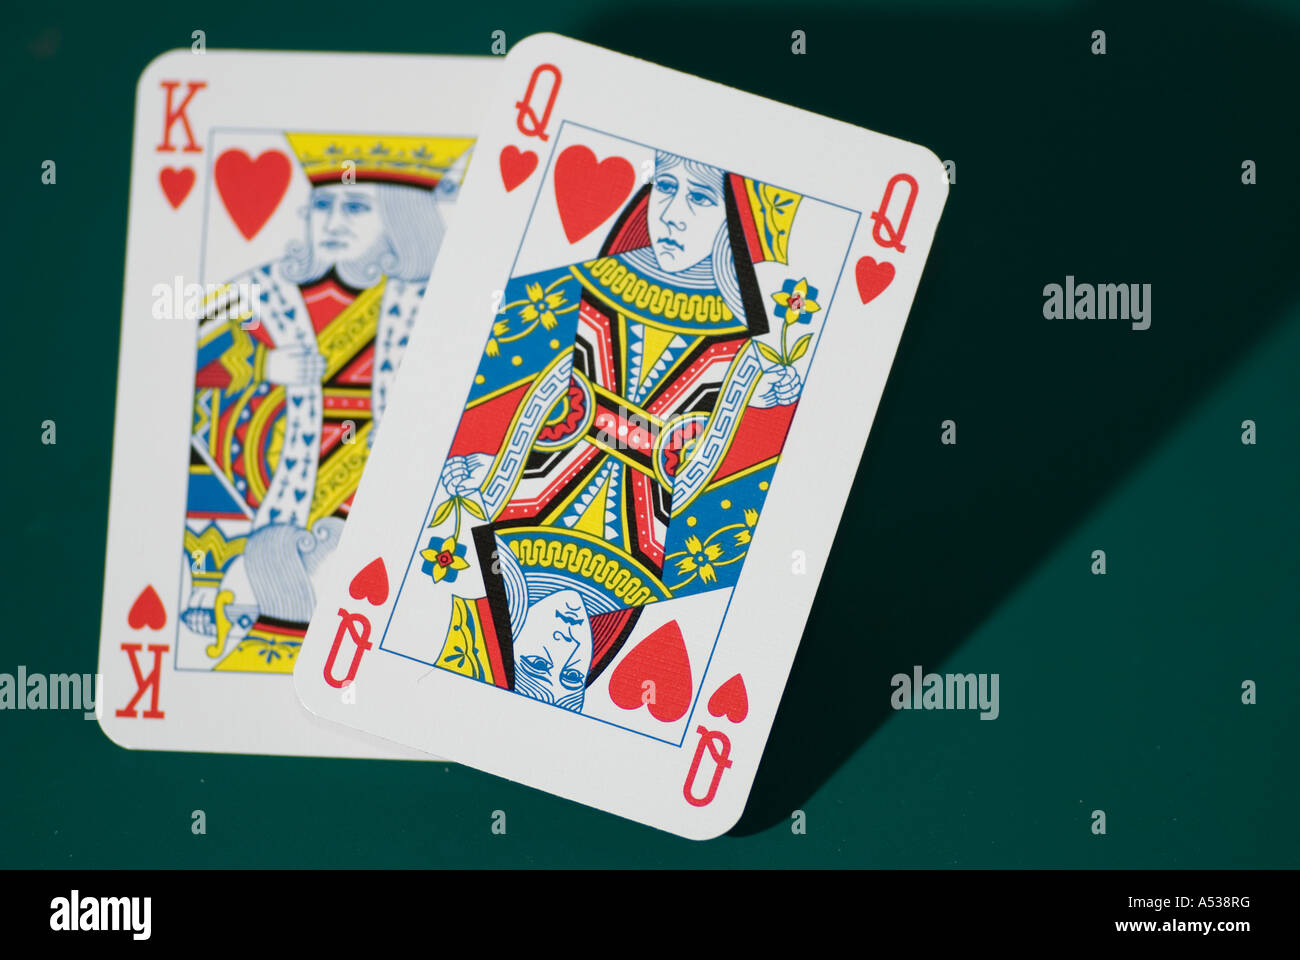 Floating King And Queen Of Hearts Playing Card Stock Photo